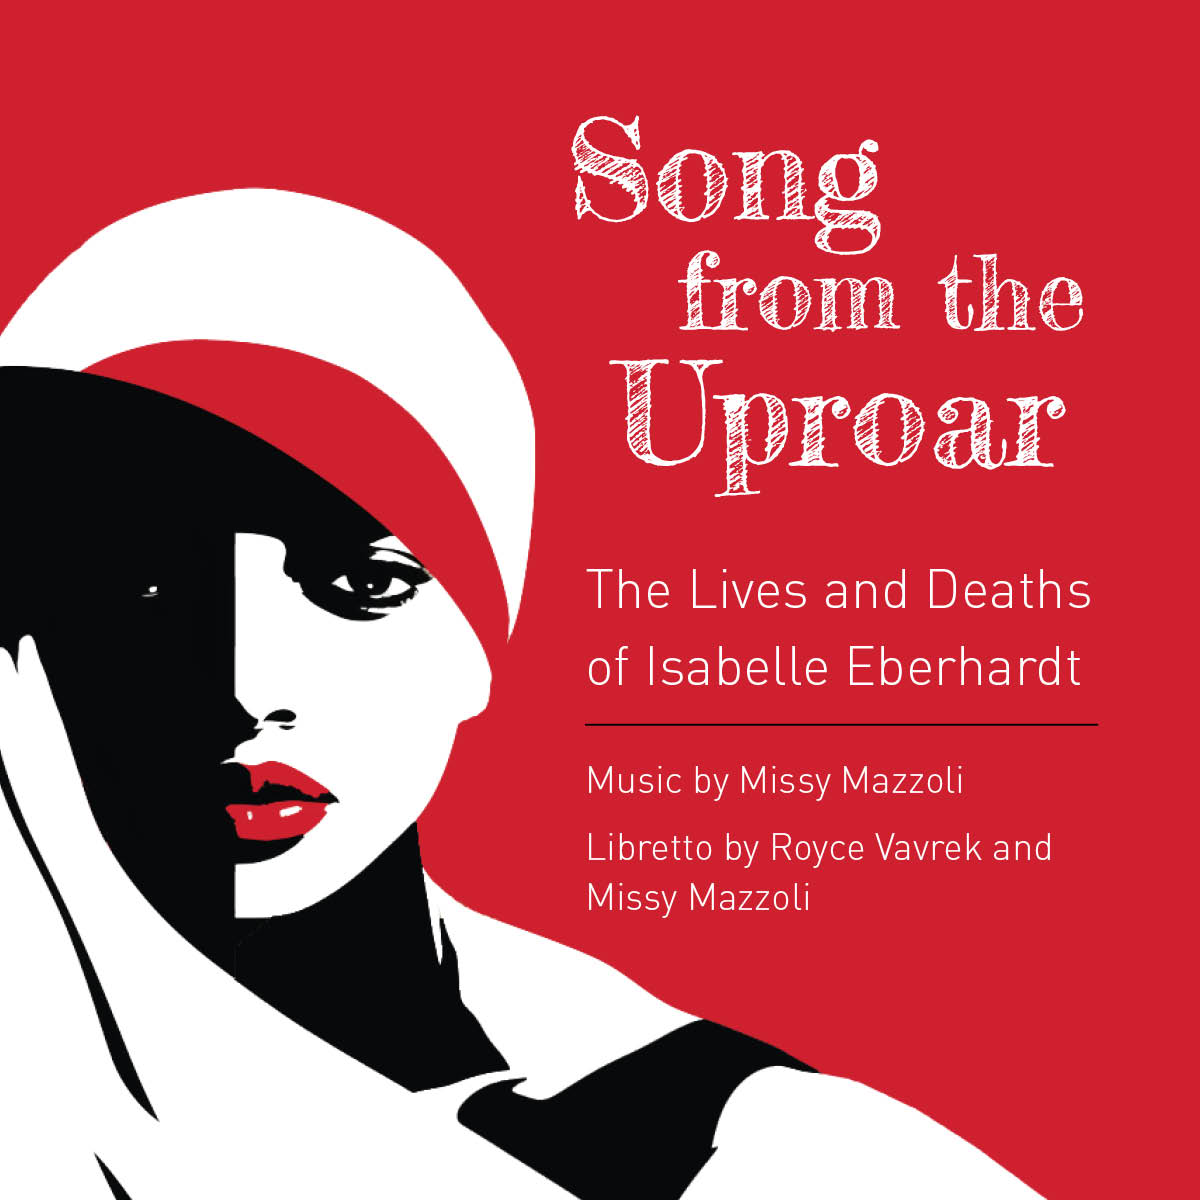 City Opera Vancouver Presents: Song from the Uproar: The Lives and Deaths of (Swiss) Isabelle Eberhardt